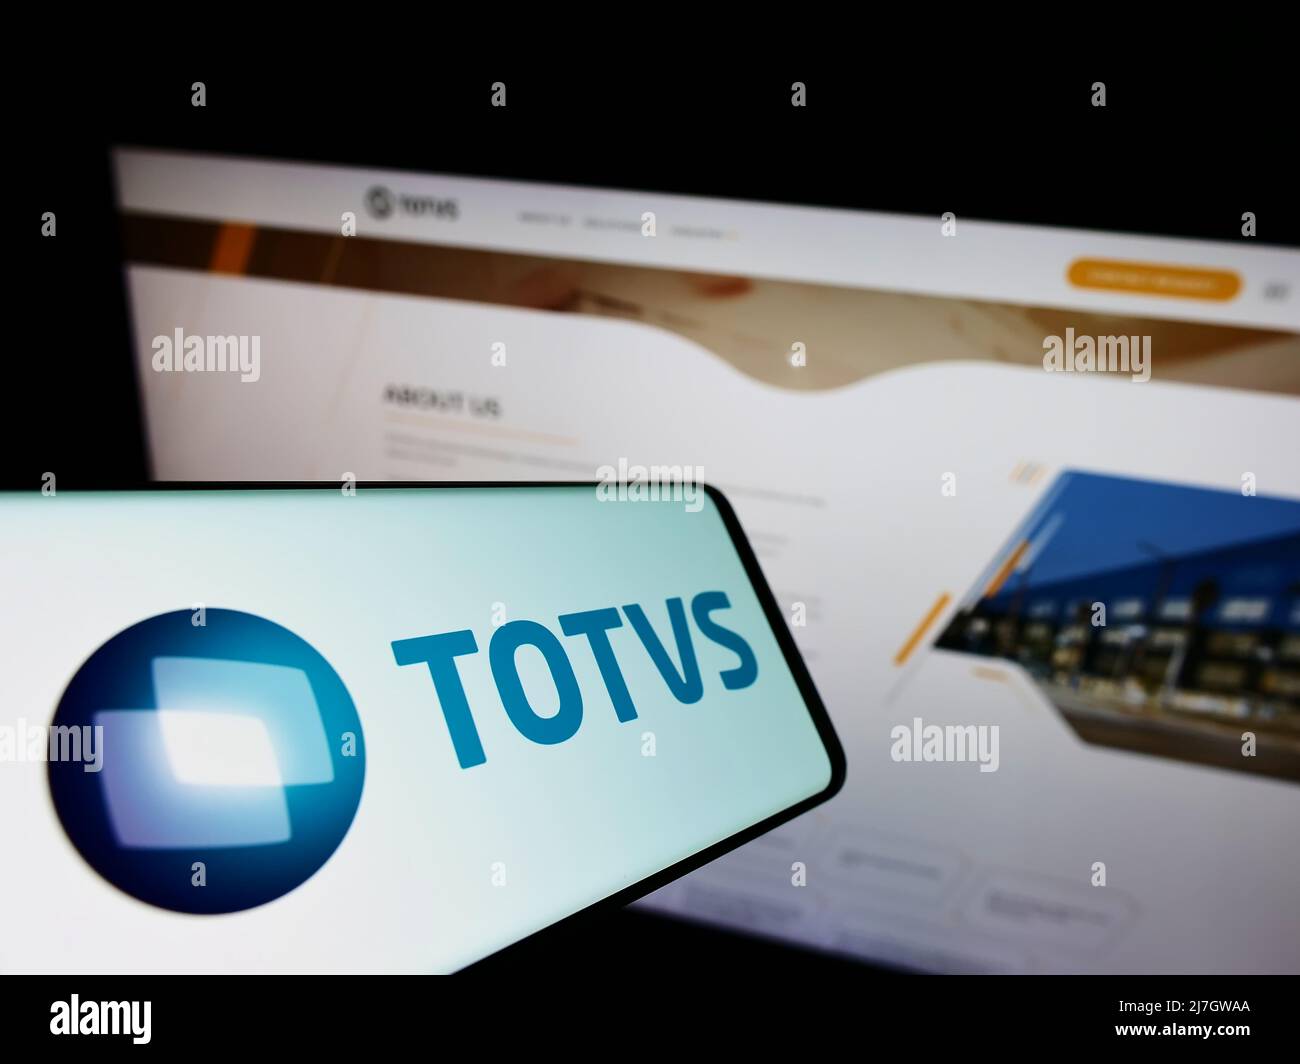 Mobile phone with logo of Brazilian software company TOTVS S.A. on screen in front of business website. Focus on center-right of phone display. Stock Photo